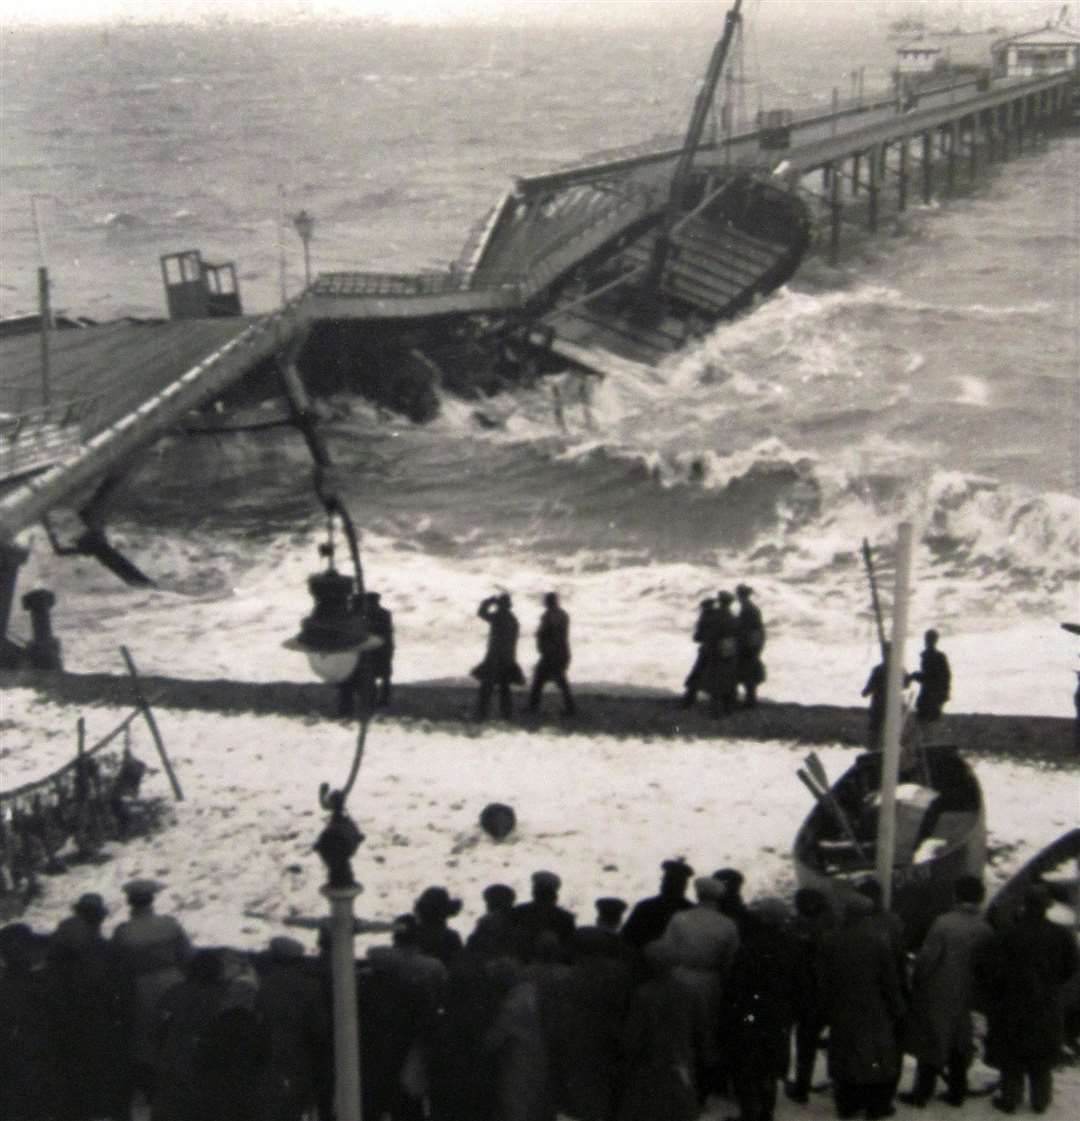 Crowds started to gather on the beach to watch the incident unfold